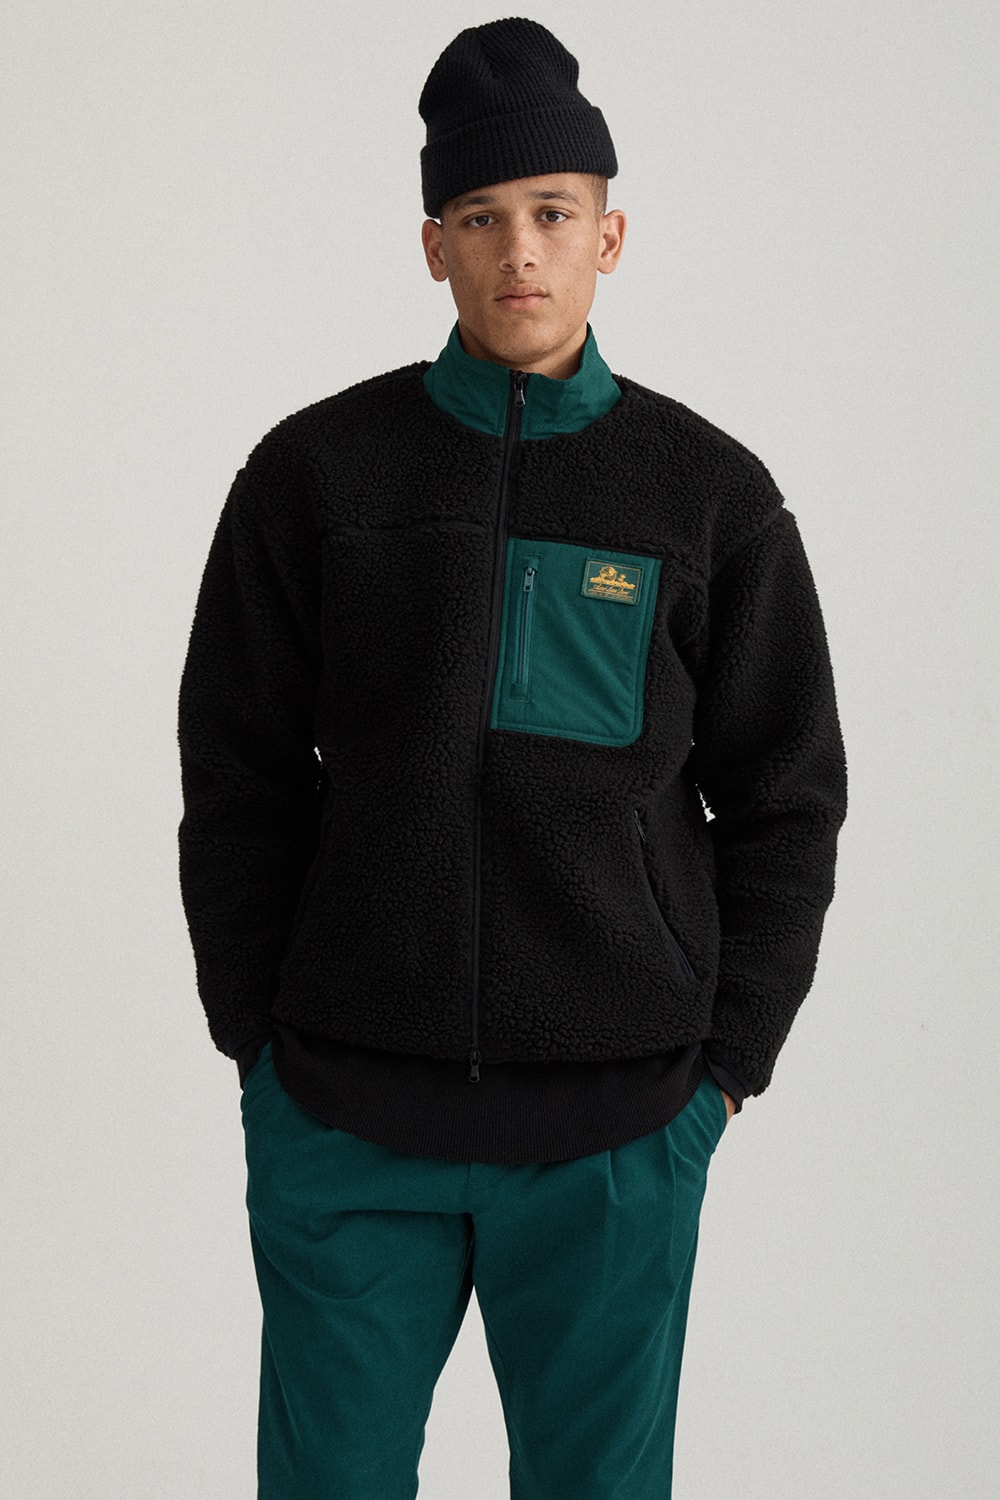 aime leon dore fall winter 2019 collection lookbook teddy santis knitwear outerwear waders woolrich collaboration buy cop purchase new york